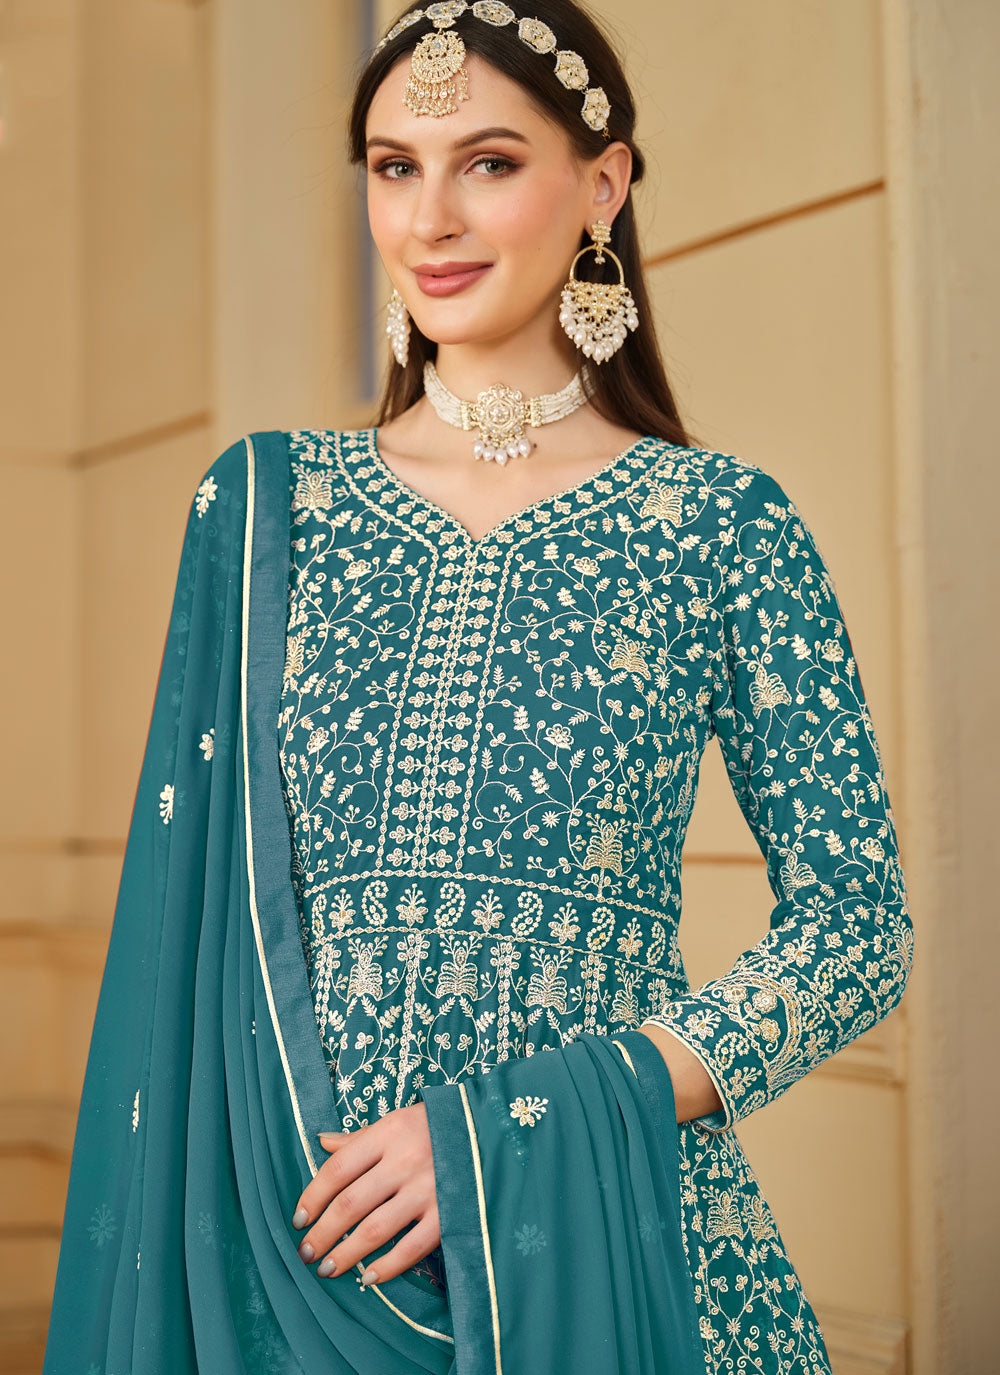 Embroidered Work Faux Georgette Salwar Suit In Turquoise For Party